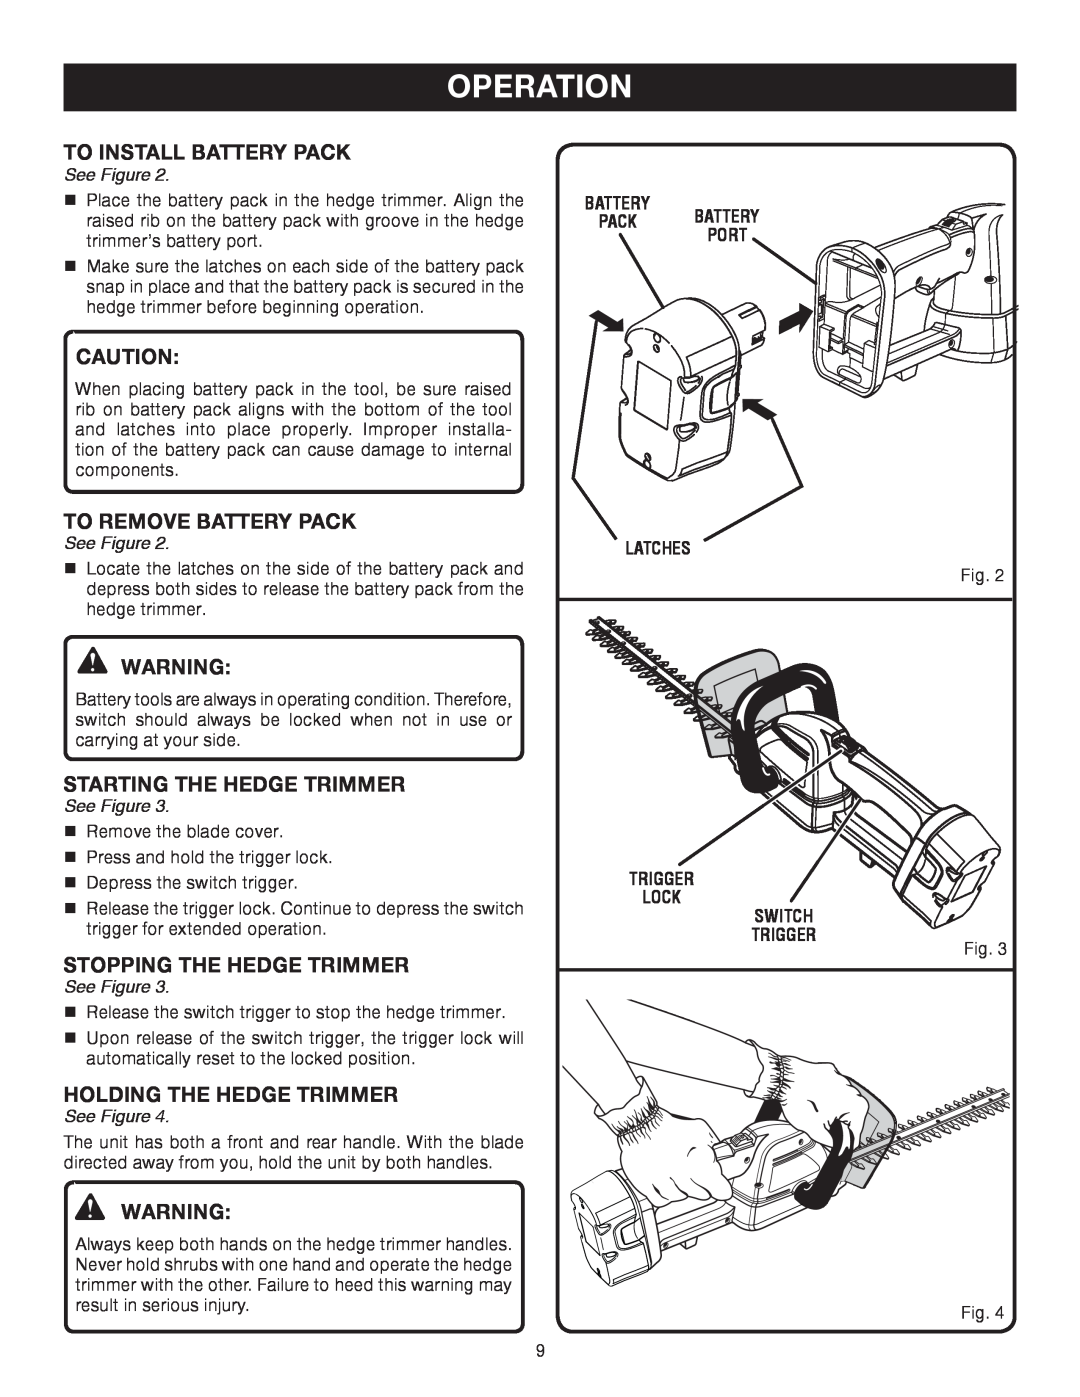 Ryobi P2600A manual To Install Battery Pack, To Remove Battery Pack, Starting The Hedge Trimmer, Stopping The Hedge Trimmer 